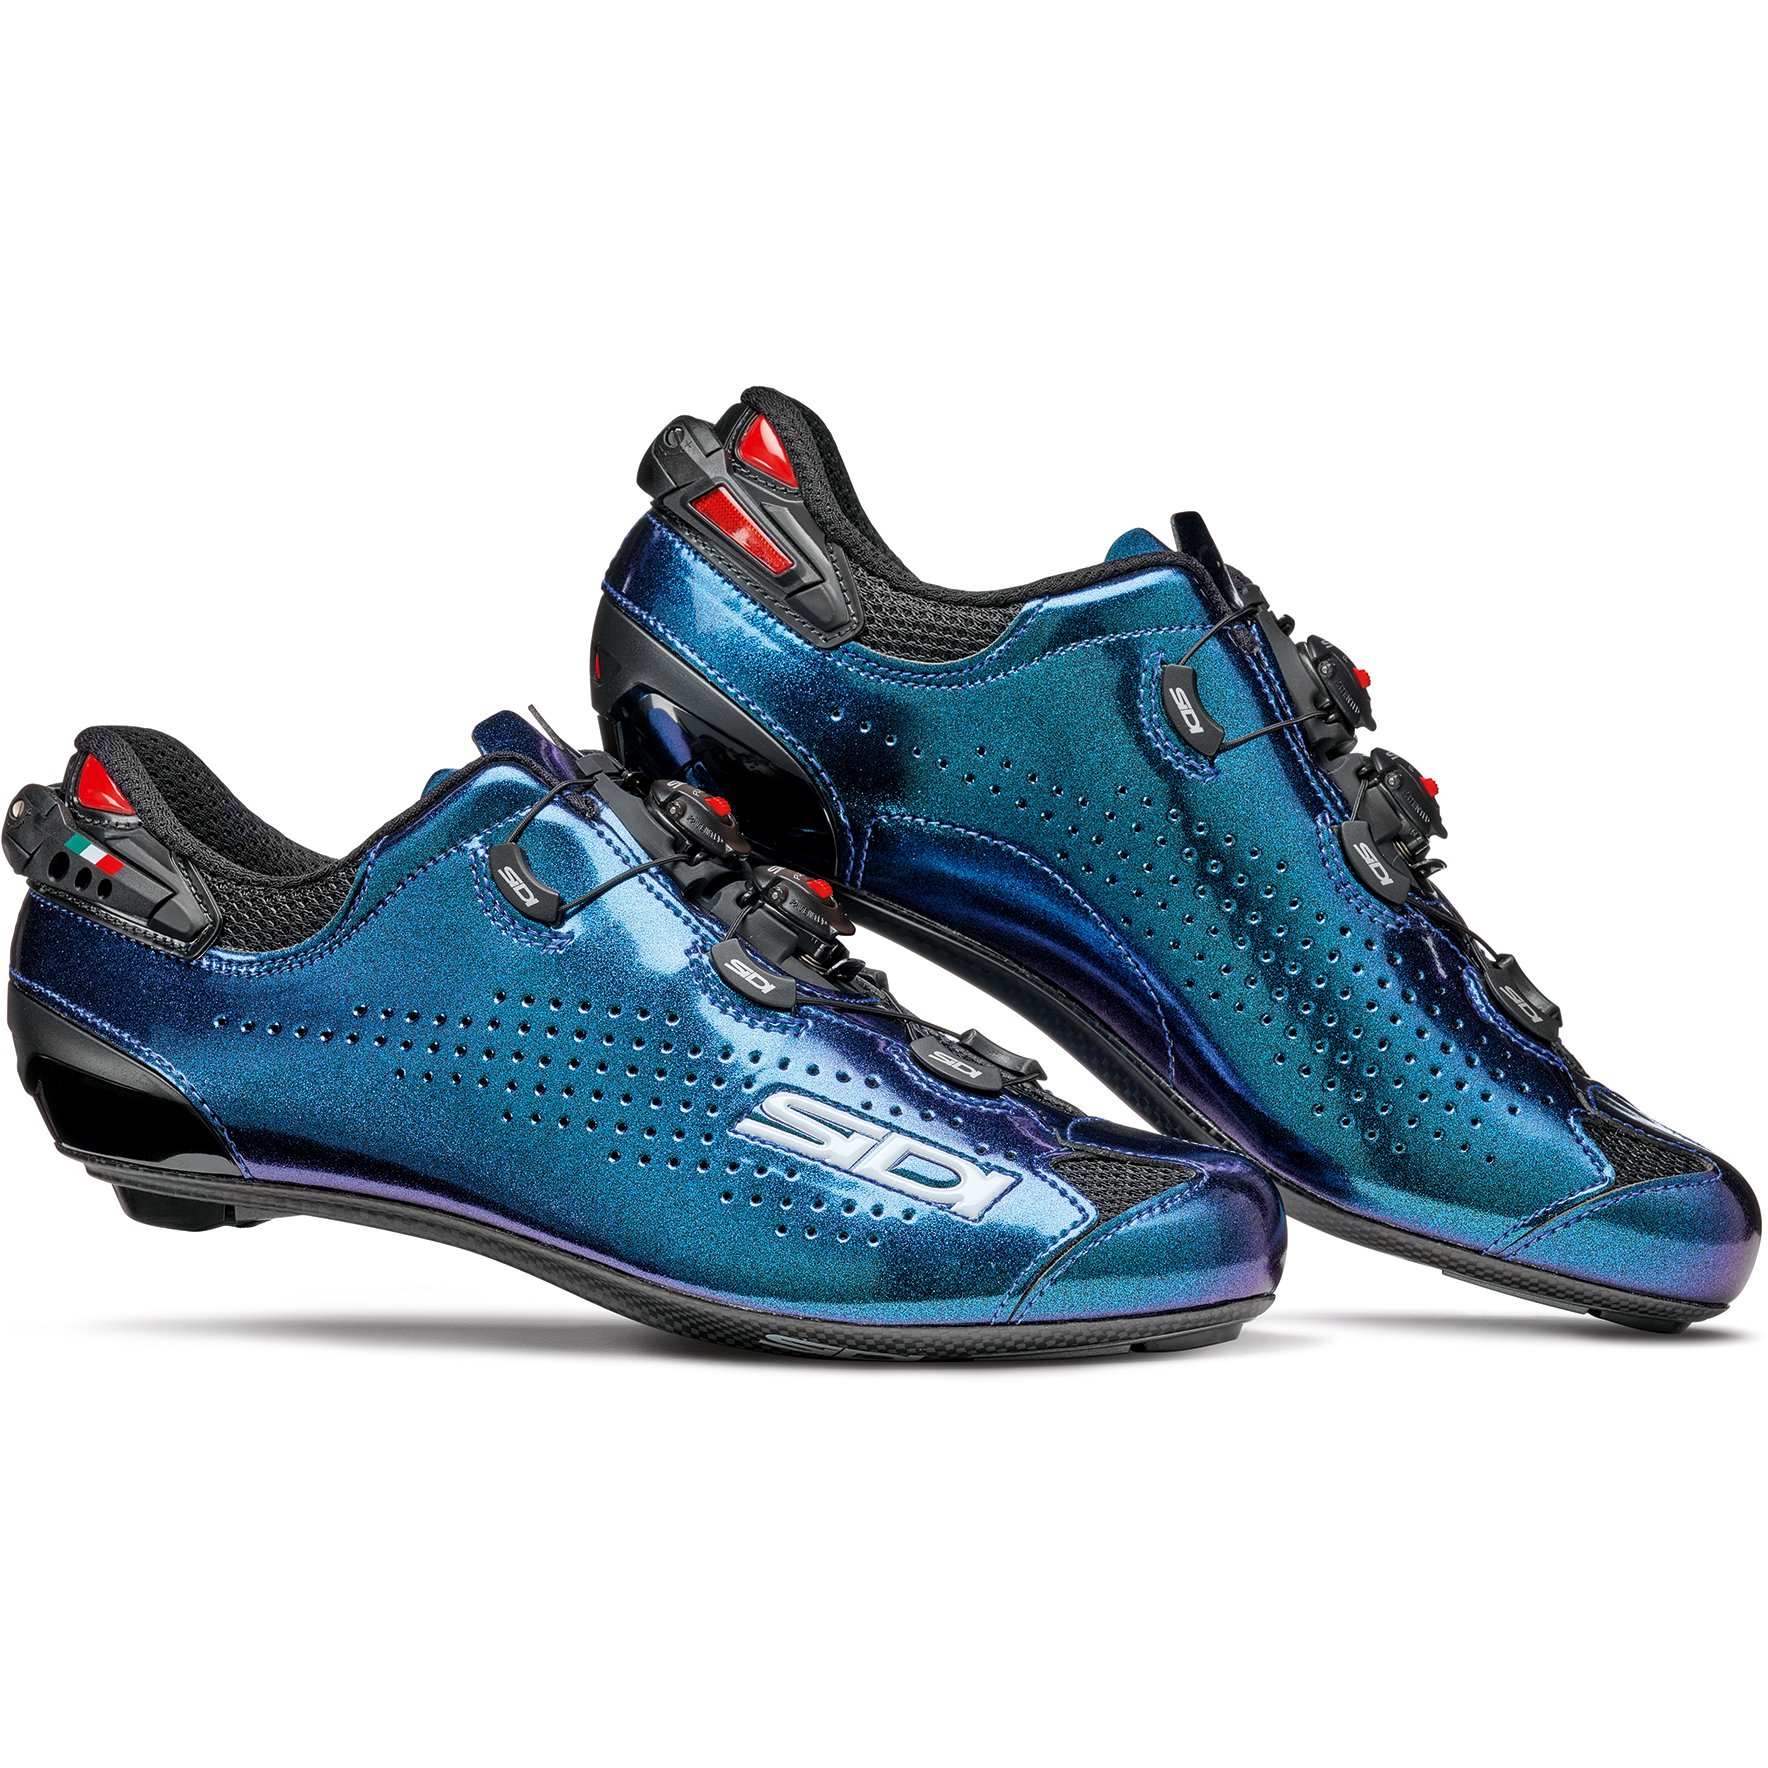 Picture of Sidi Shot 2 Road Shoes - galaxy